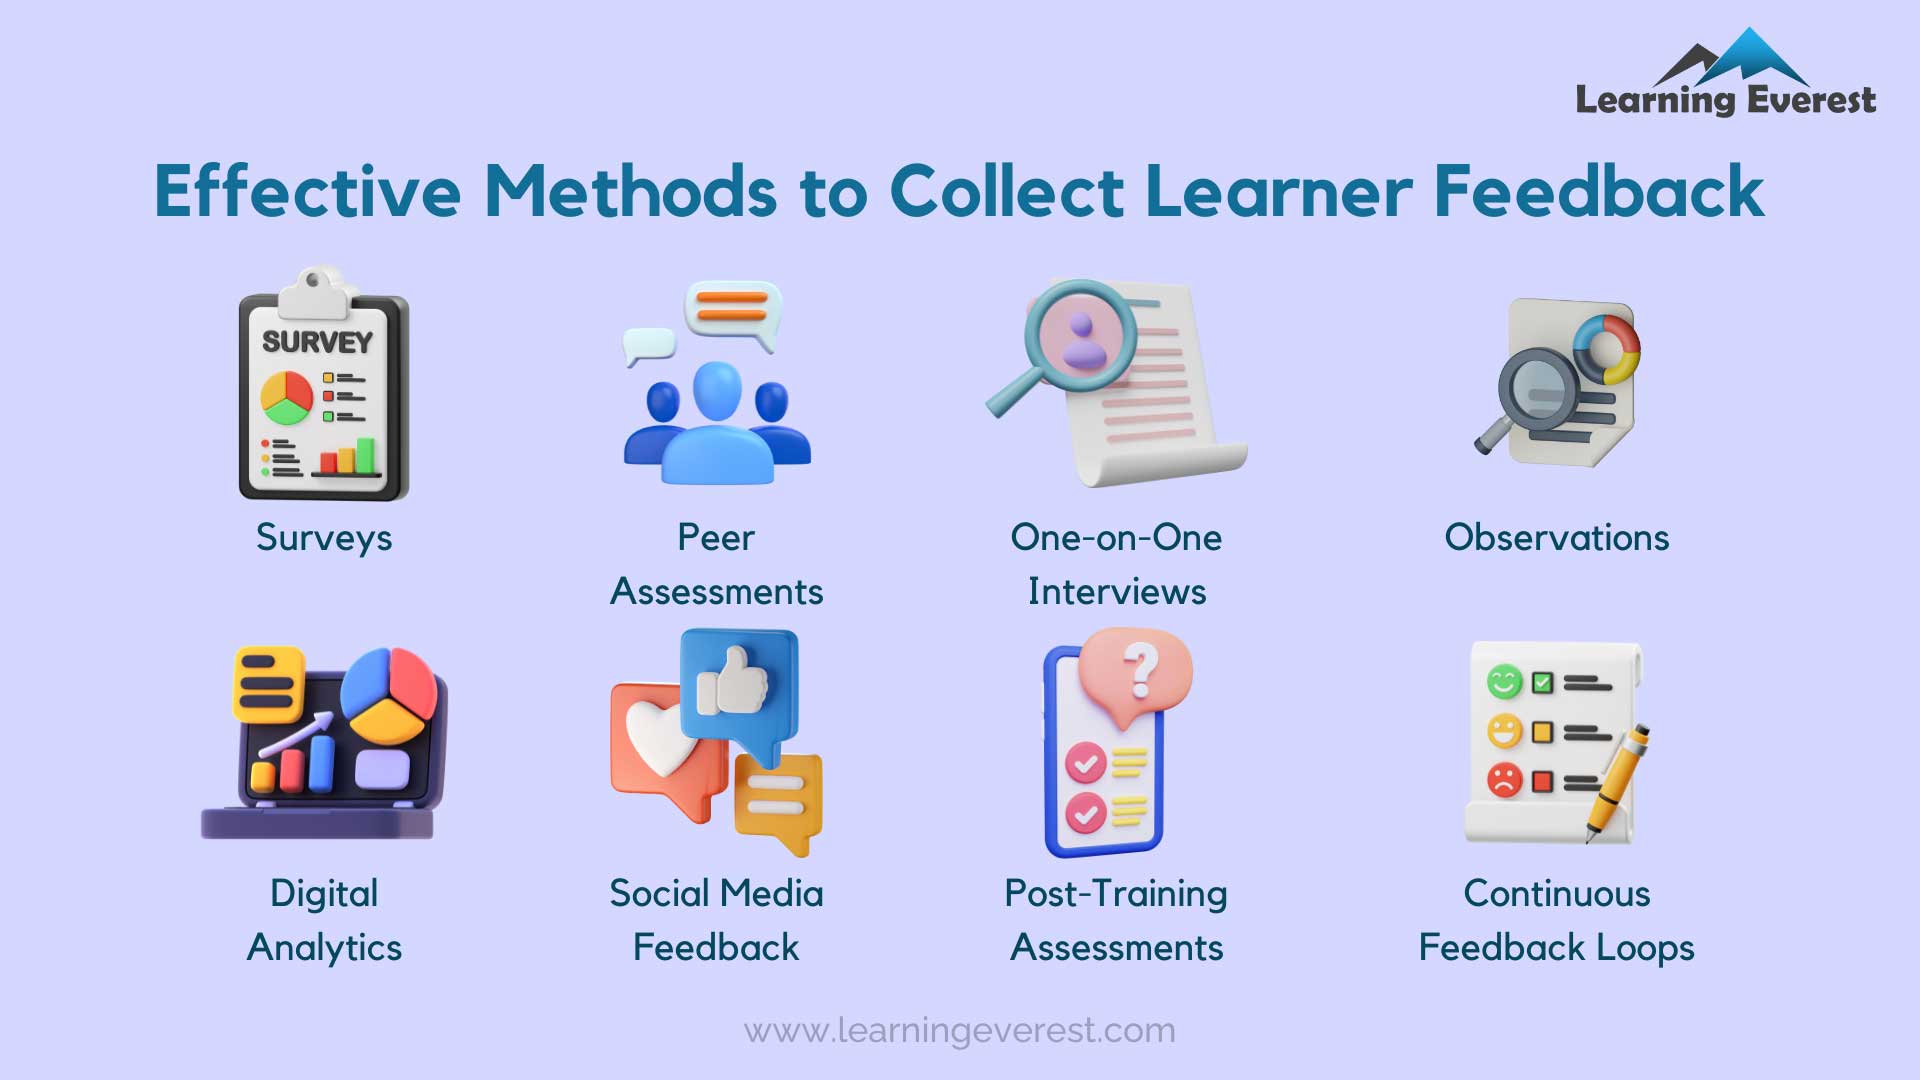 Effective Methods to Collect Learner Feedback